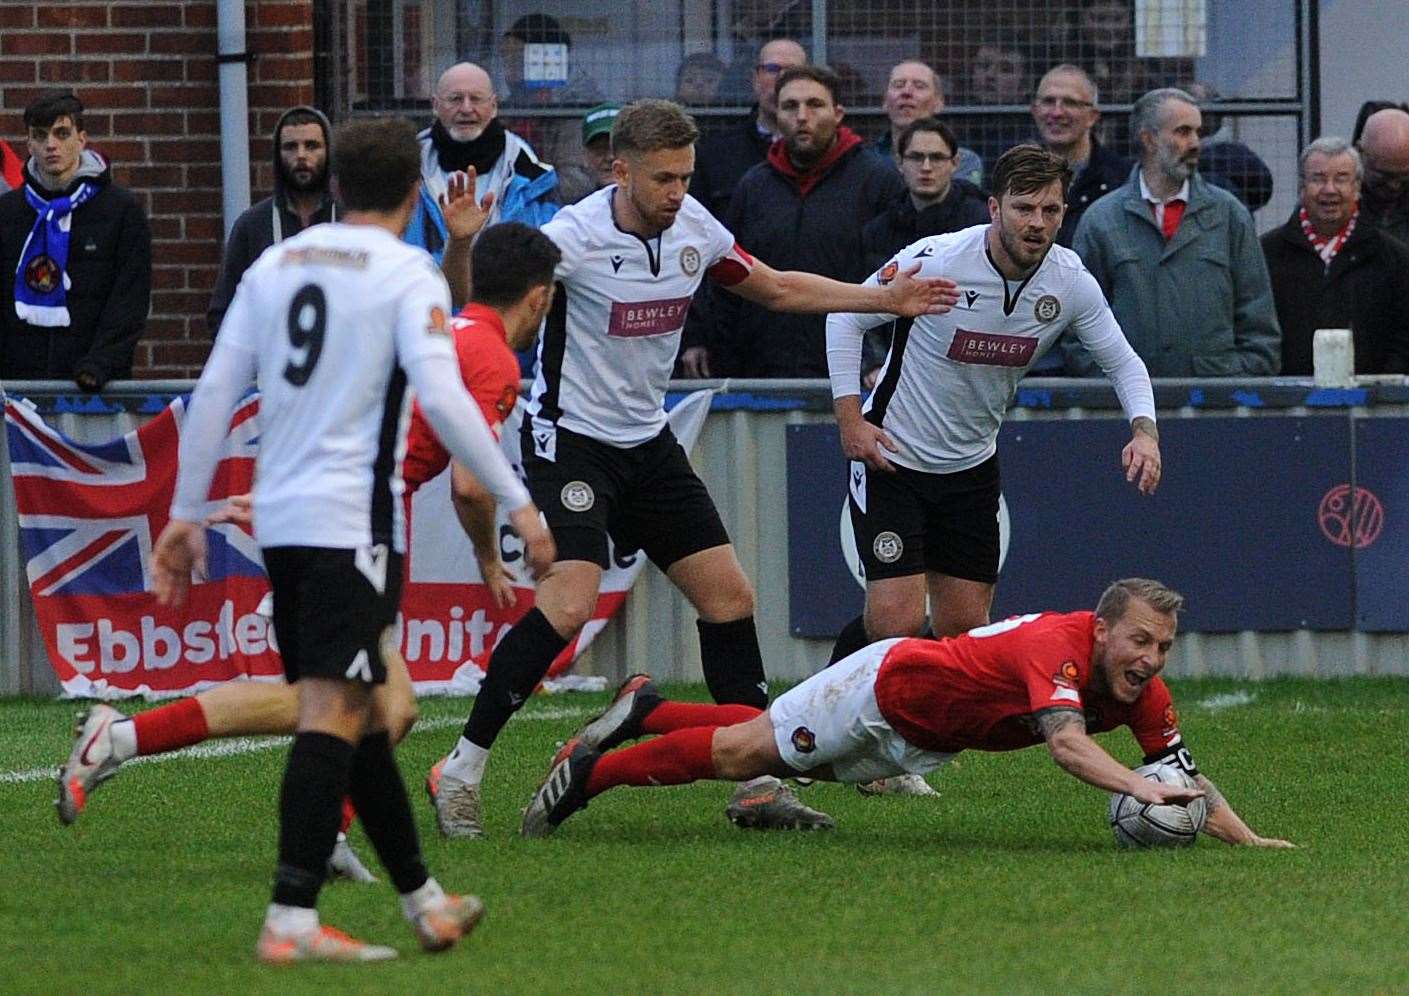 Ebbsfleet skipper Chris Solly is floored during Saturday's win at Hungerford.